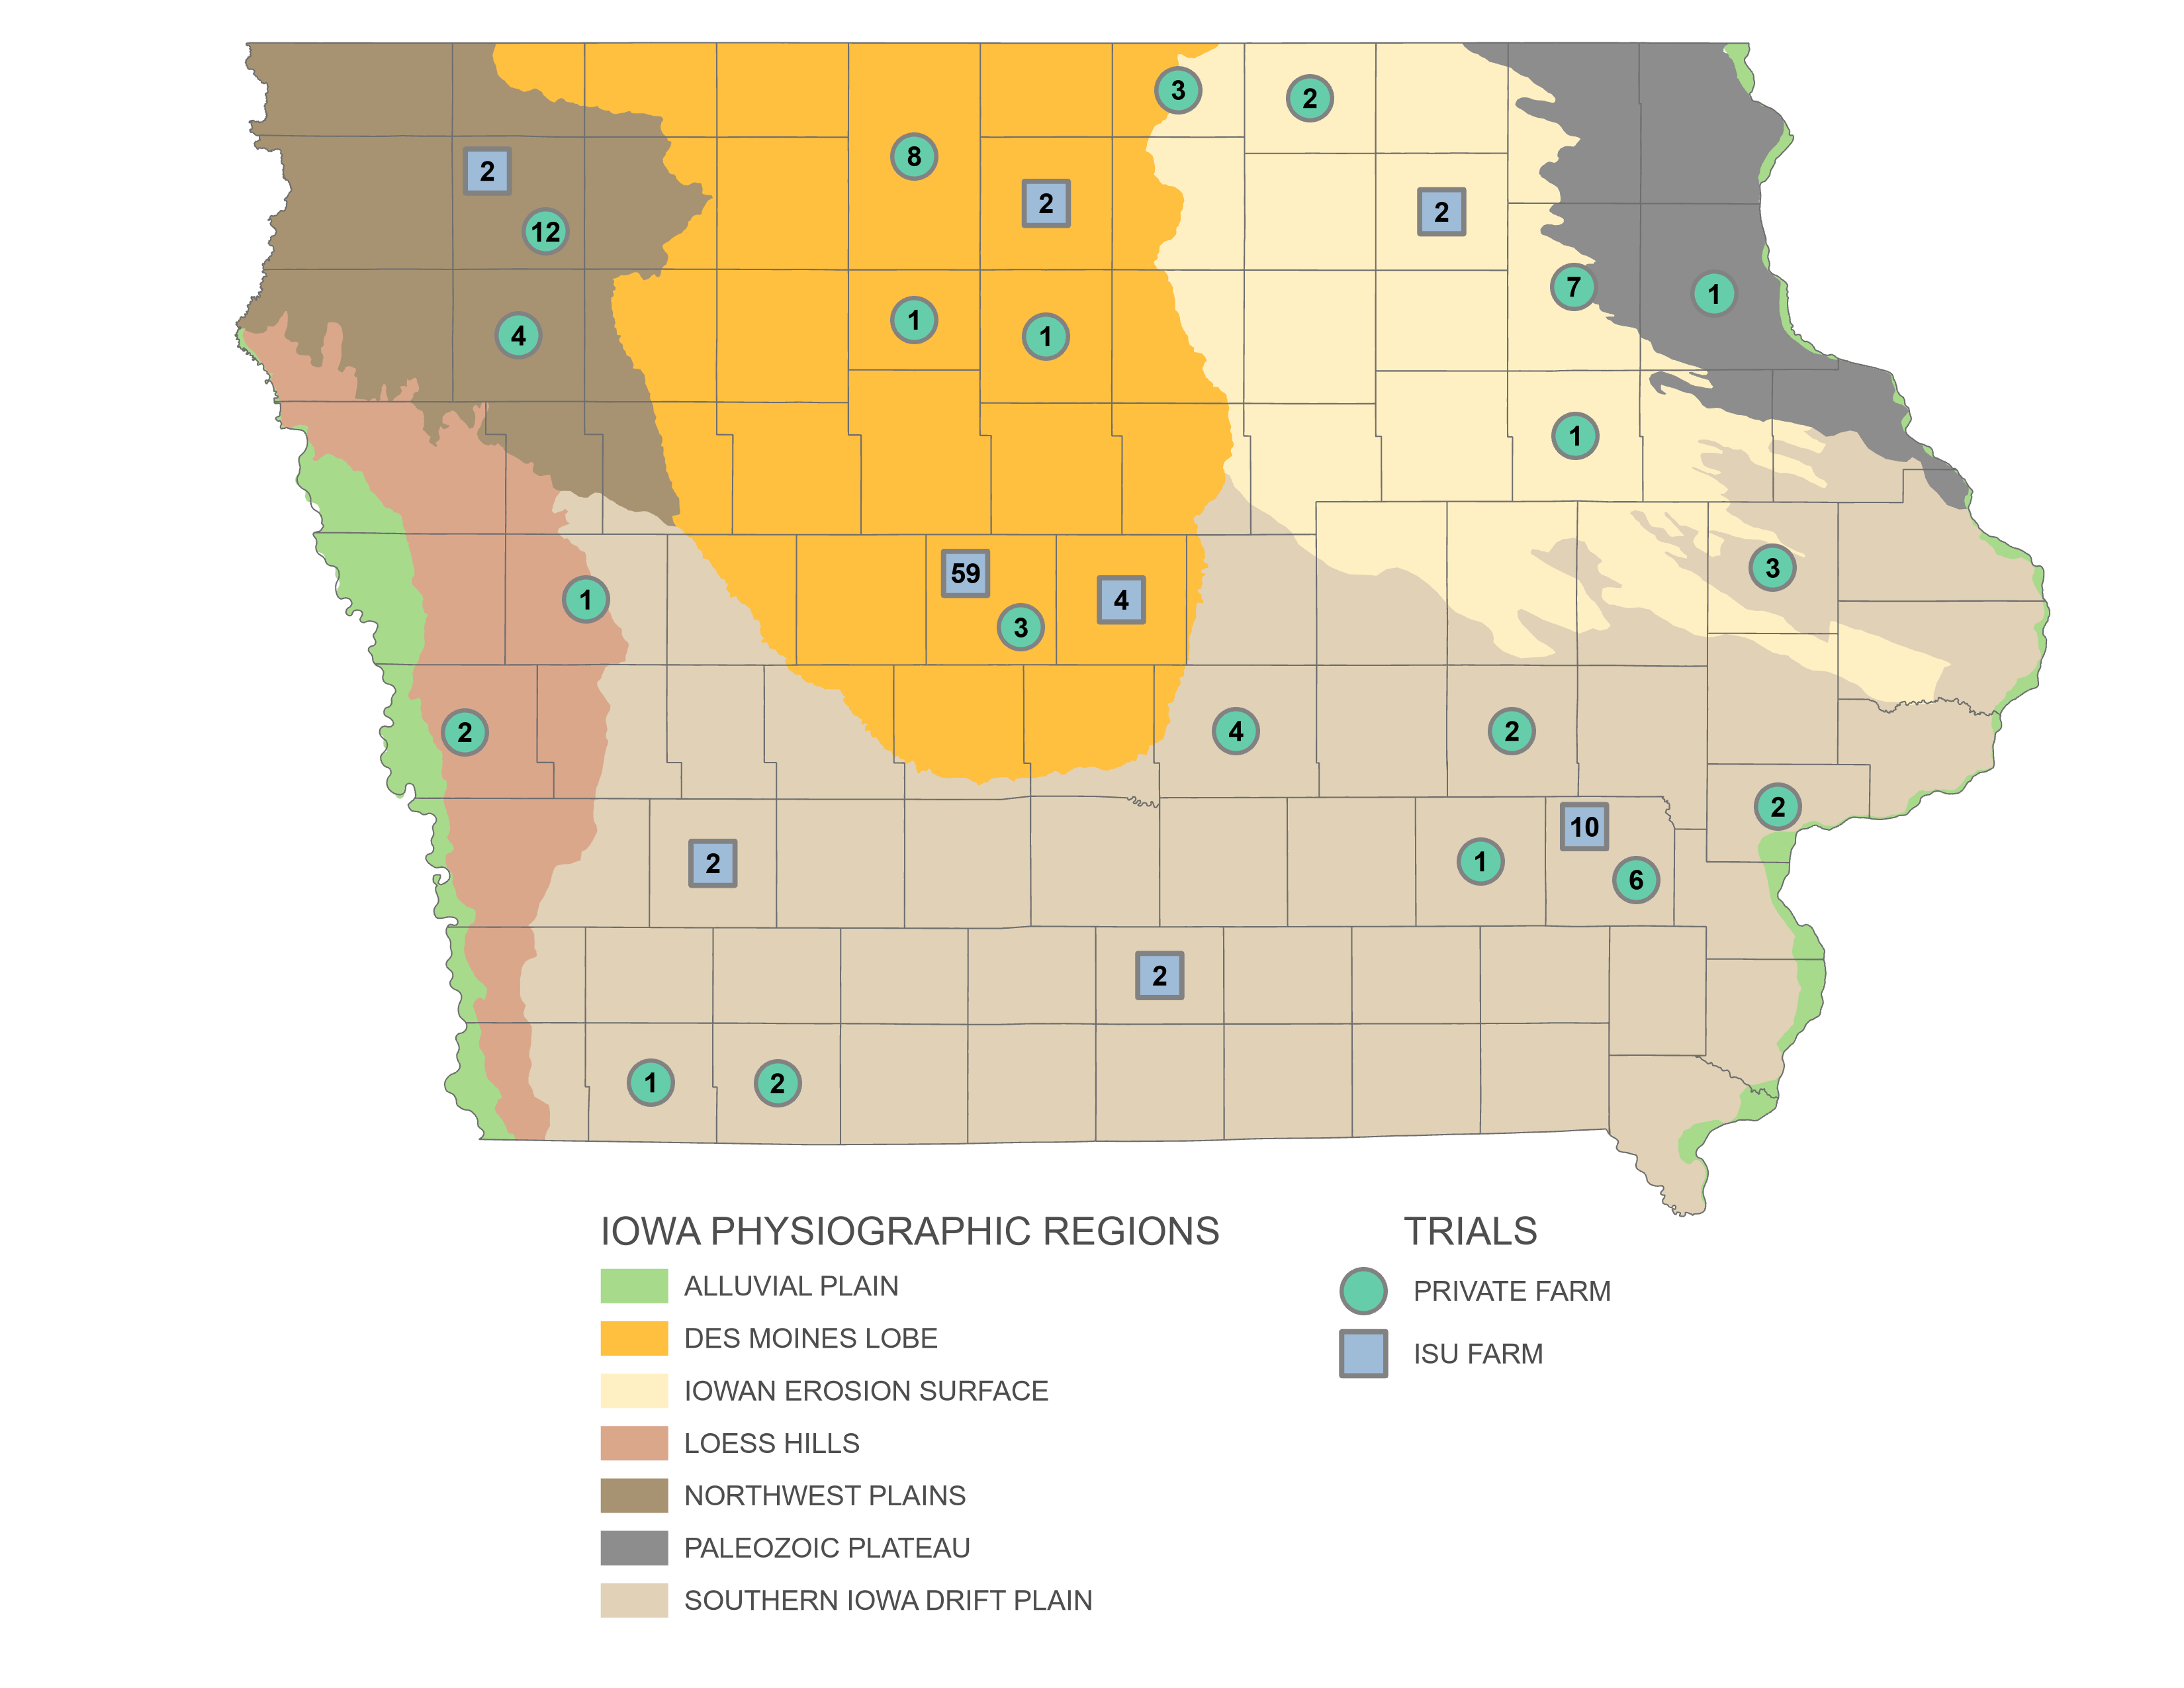 Iowa Nitrogen Initiative on-farm trial locations pin pointed on a map of Iowa's physiographic regions